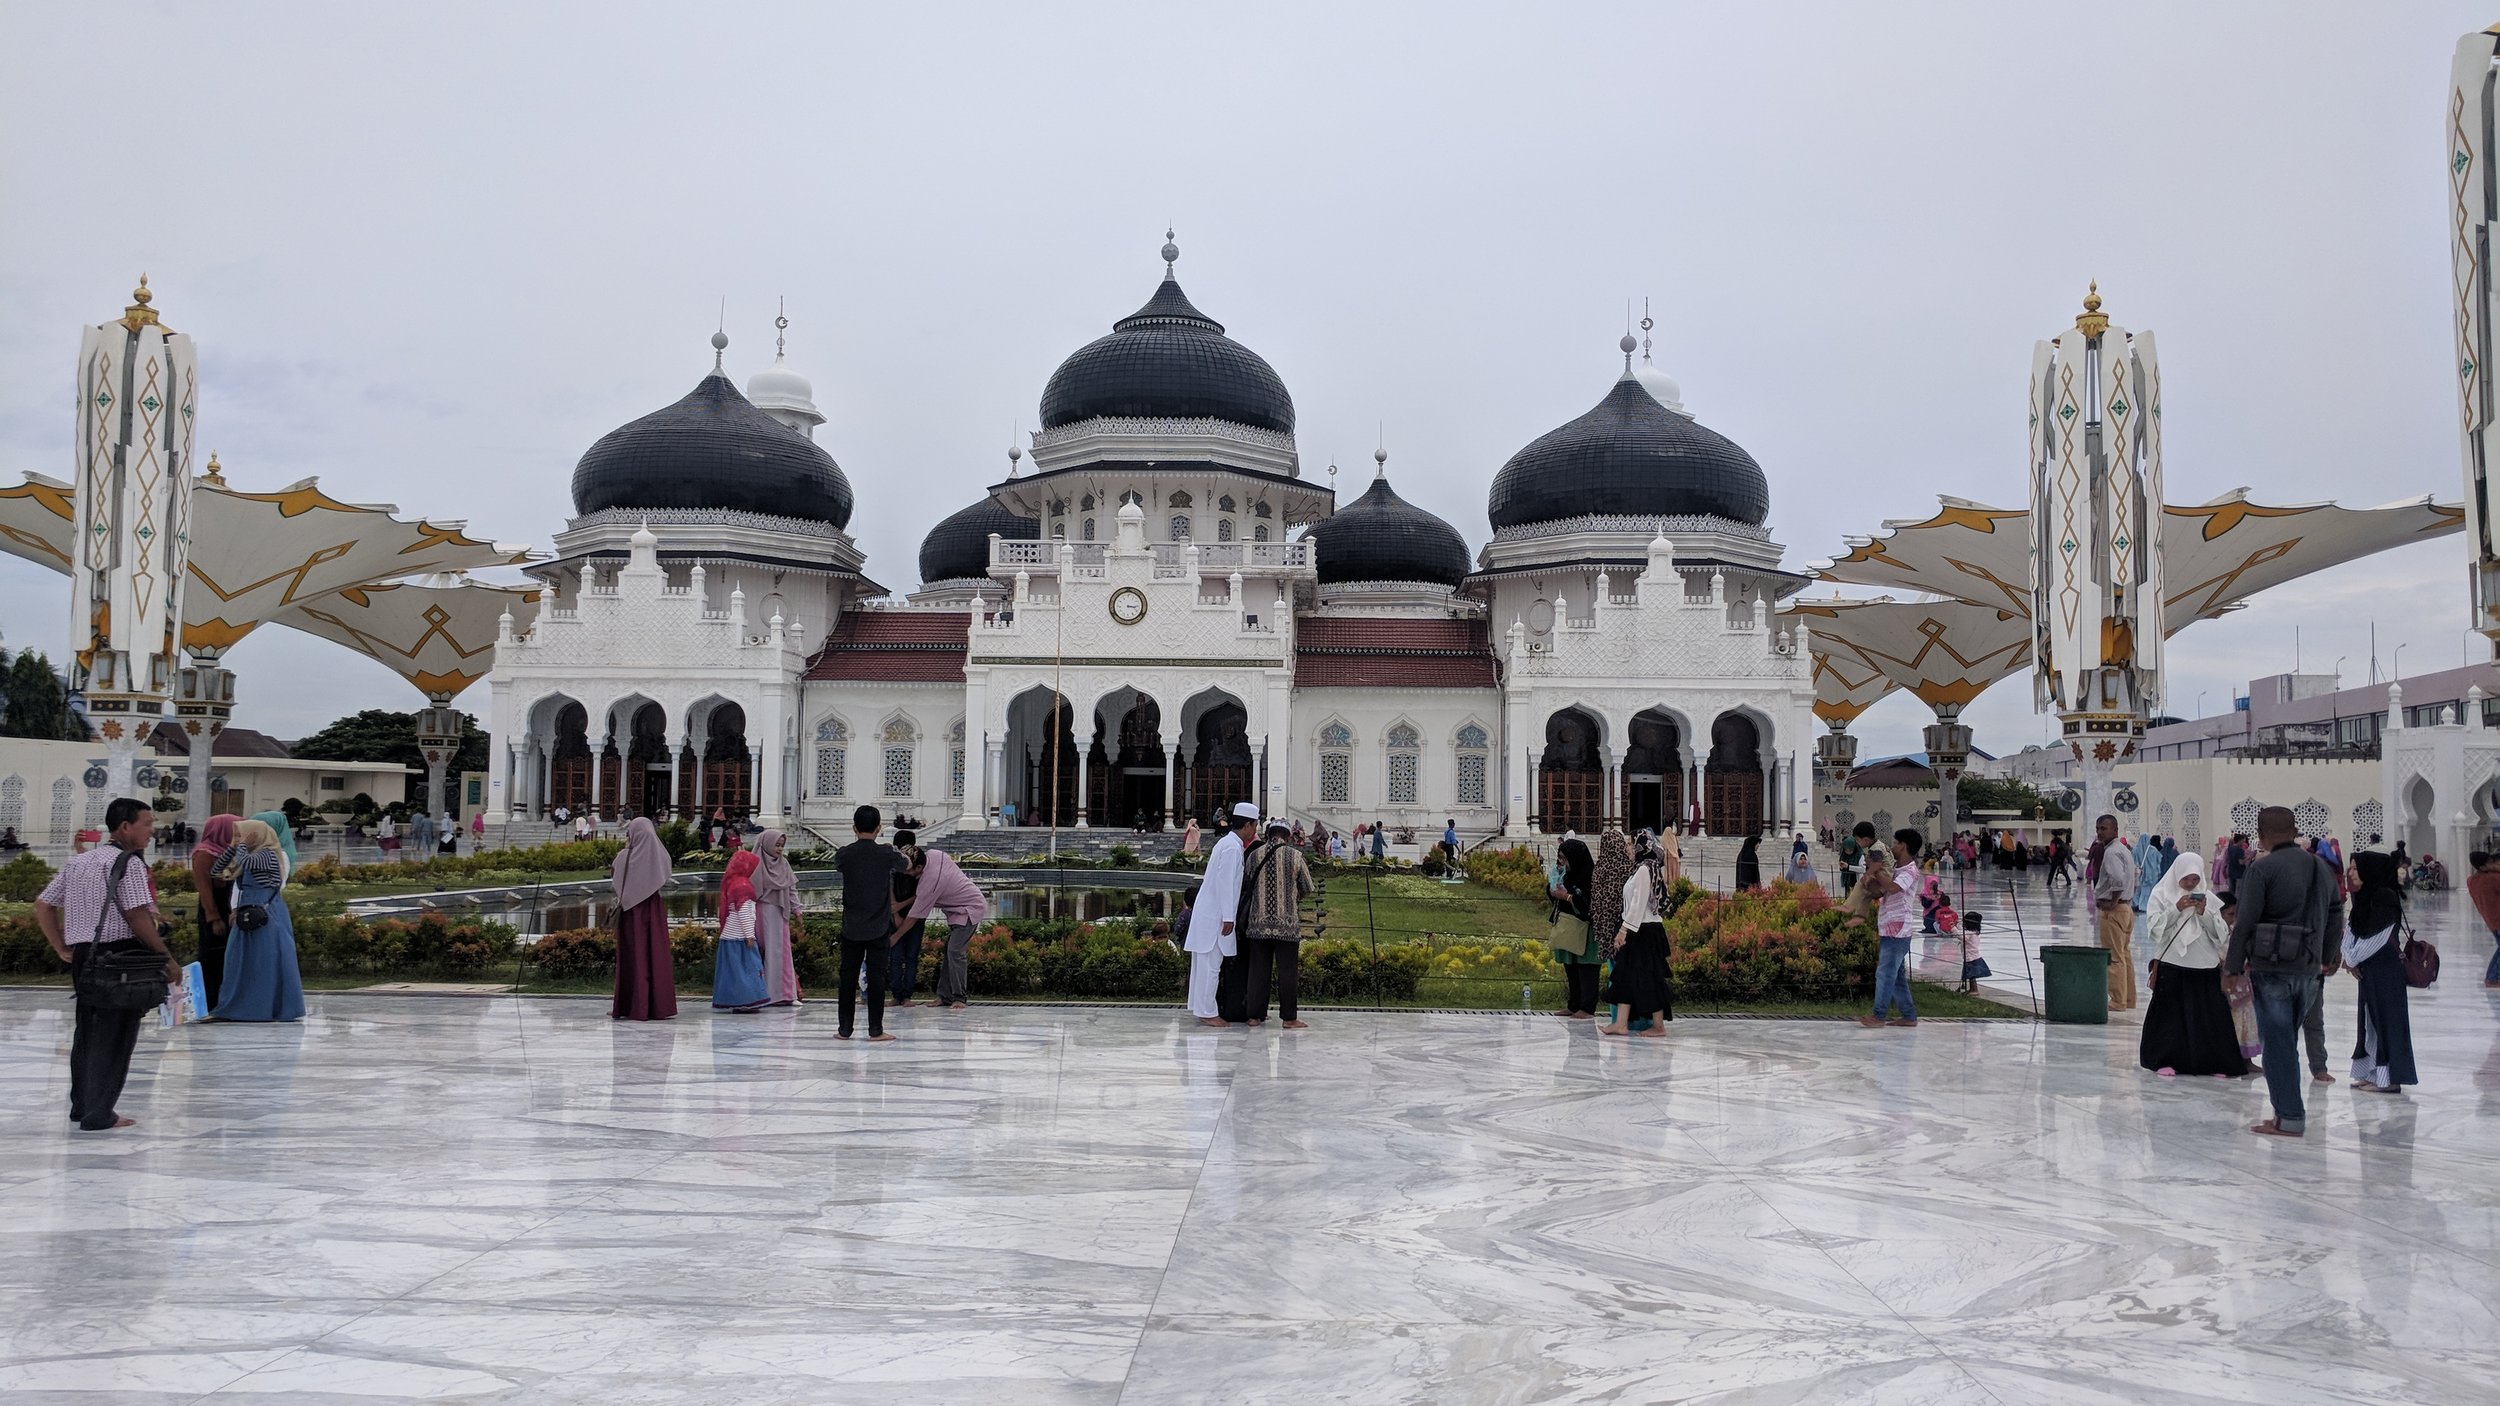  A view of the beautiful Baiturrahman Grand Mosque from the front. 